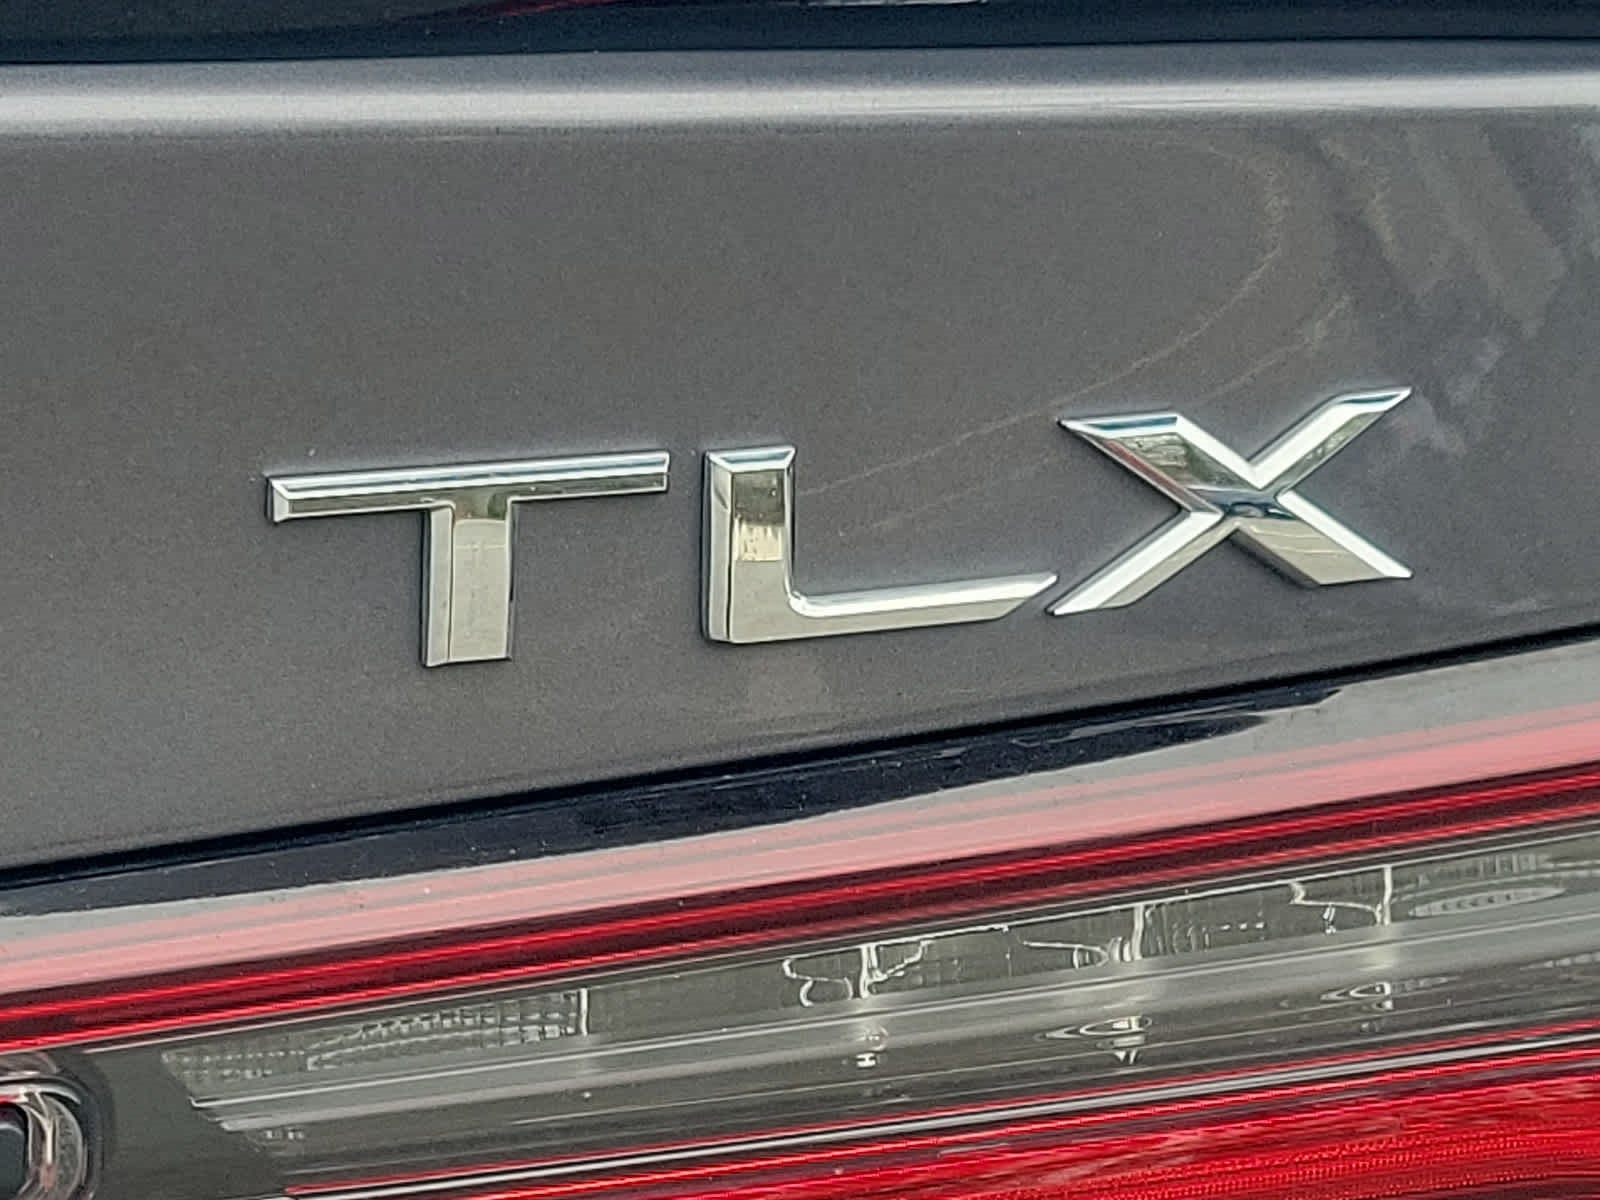 2021 Acura TLX FWD w/A-Spec Package